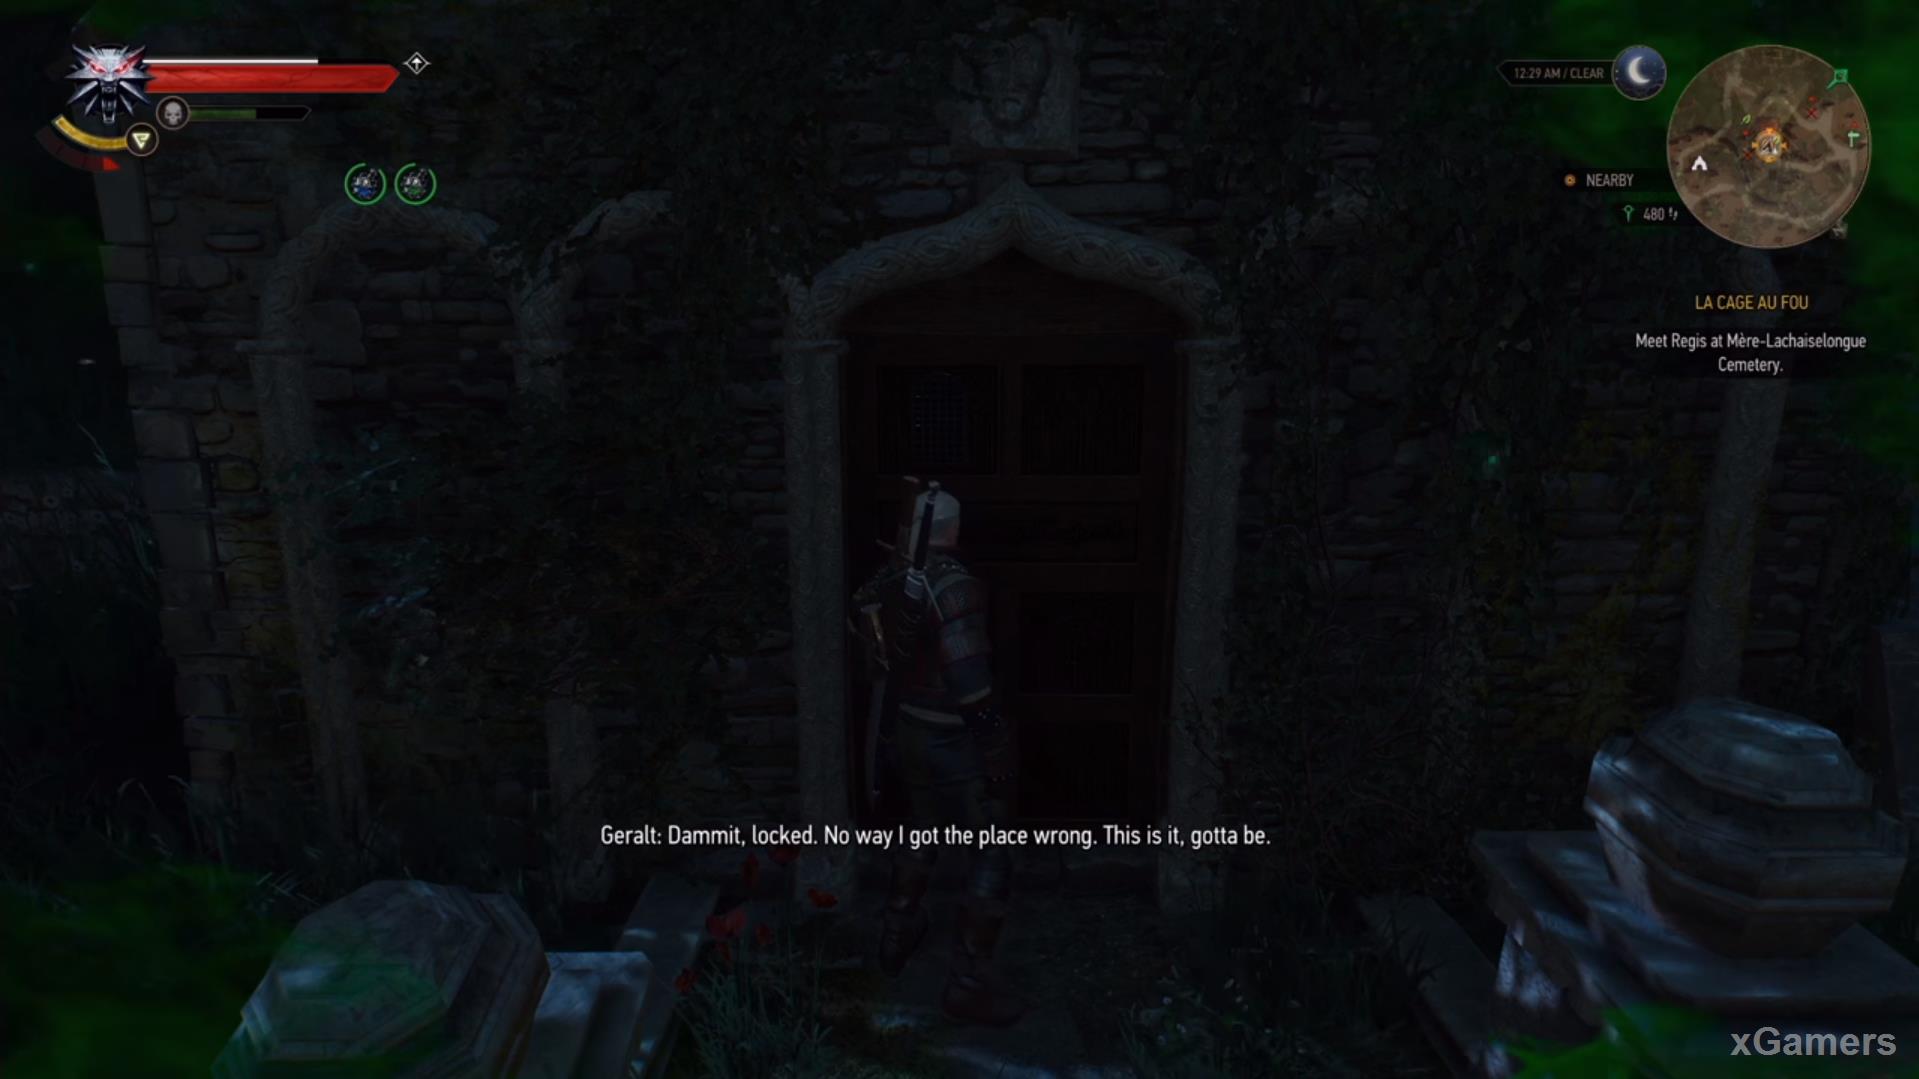 Geralt approaches the door of the crypt but that it is closed